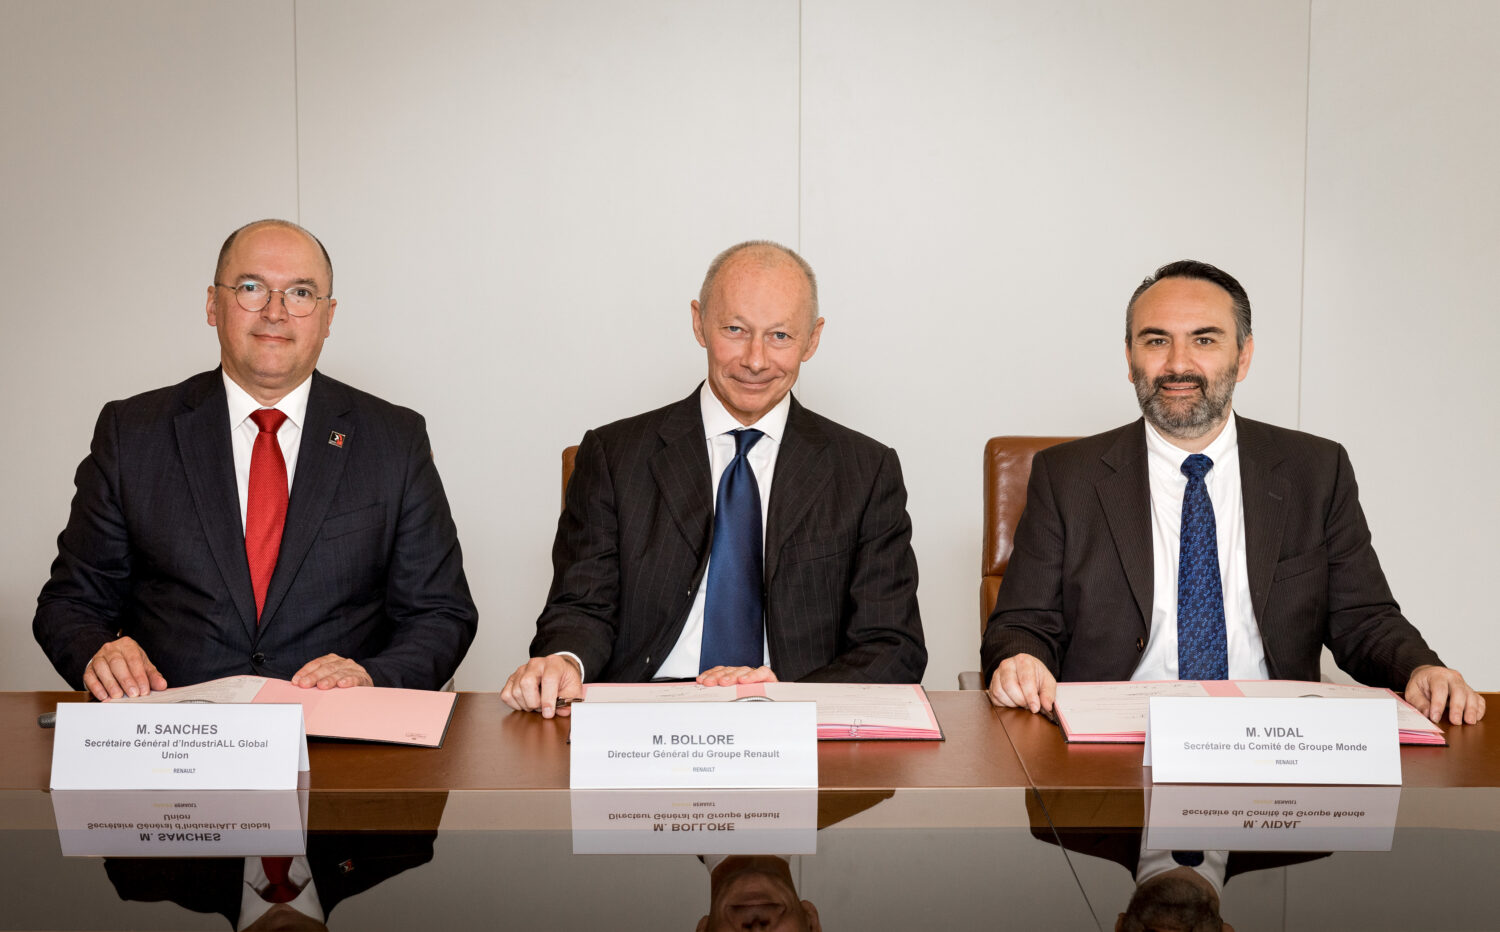 GROUPE RENAULT, ITS GROUP WORKS COUNCIL AND INDUSTRIALL GLOBAL UNION SIGN A GLOBAL AGREEMENT ON QUALITY OF WORK LIFE